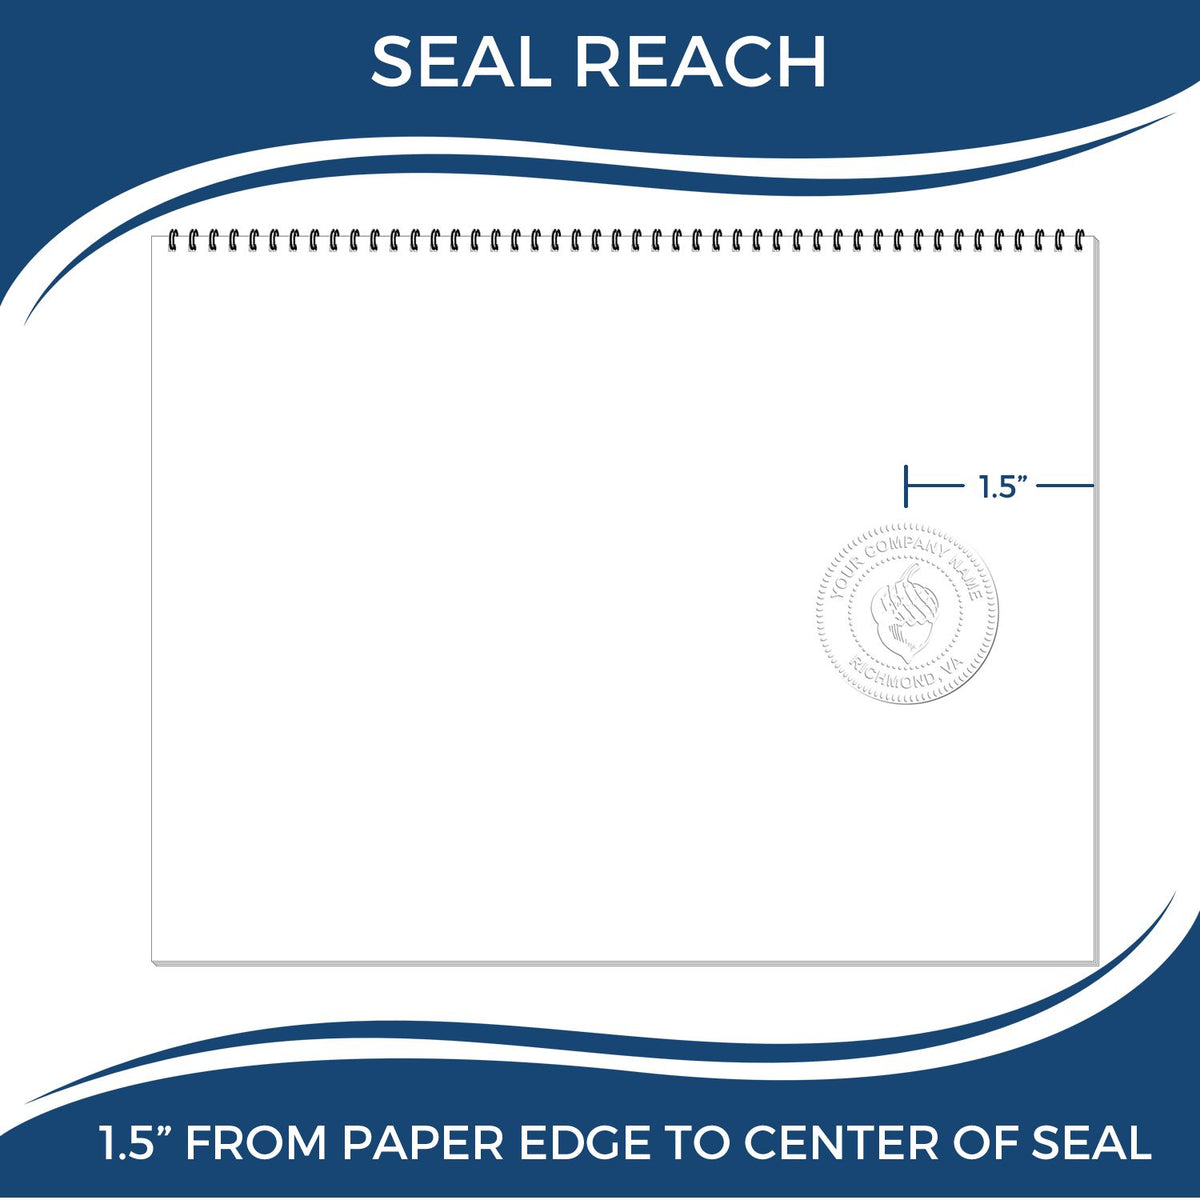 An infographic showing the seal reach which is represented by a ruler and a miniature seal image of the Soft Oklahoma Professional Geologist Seal